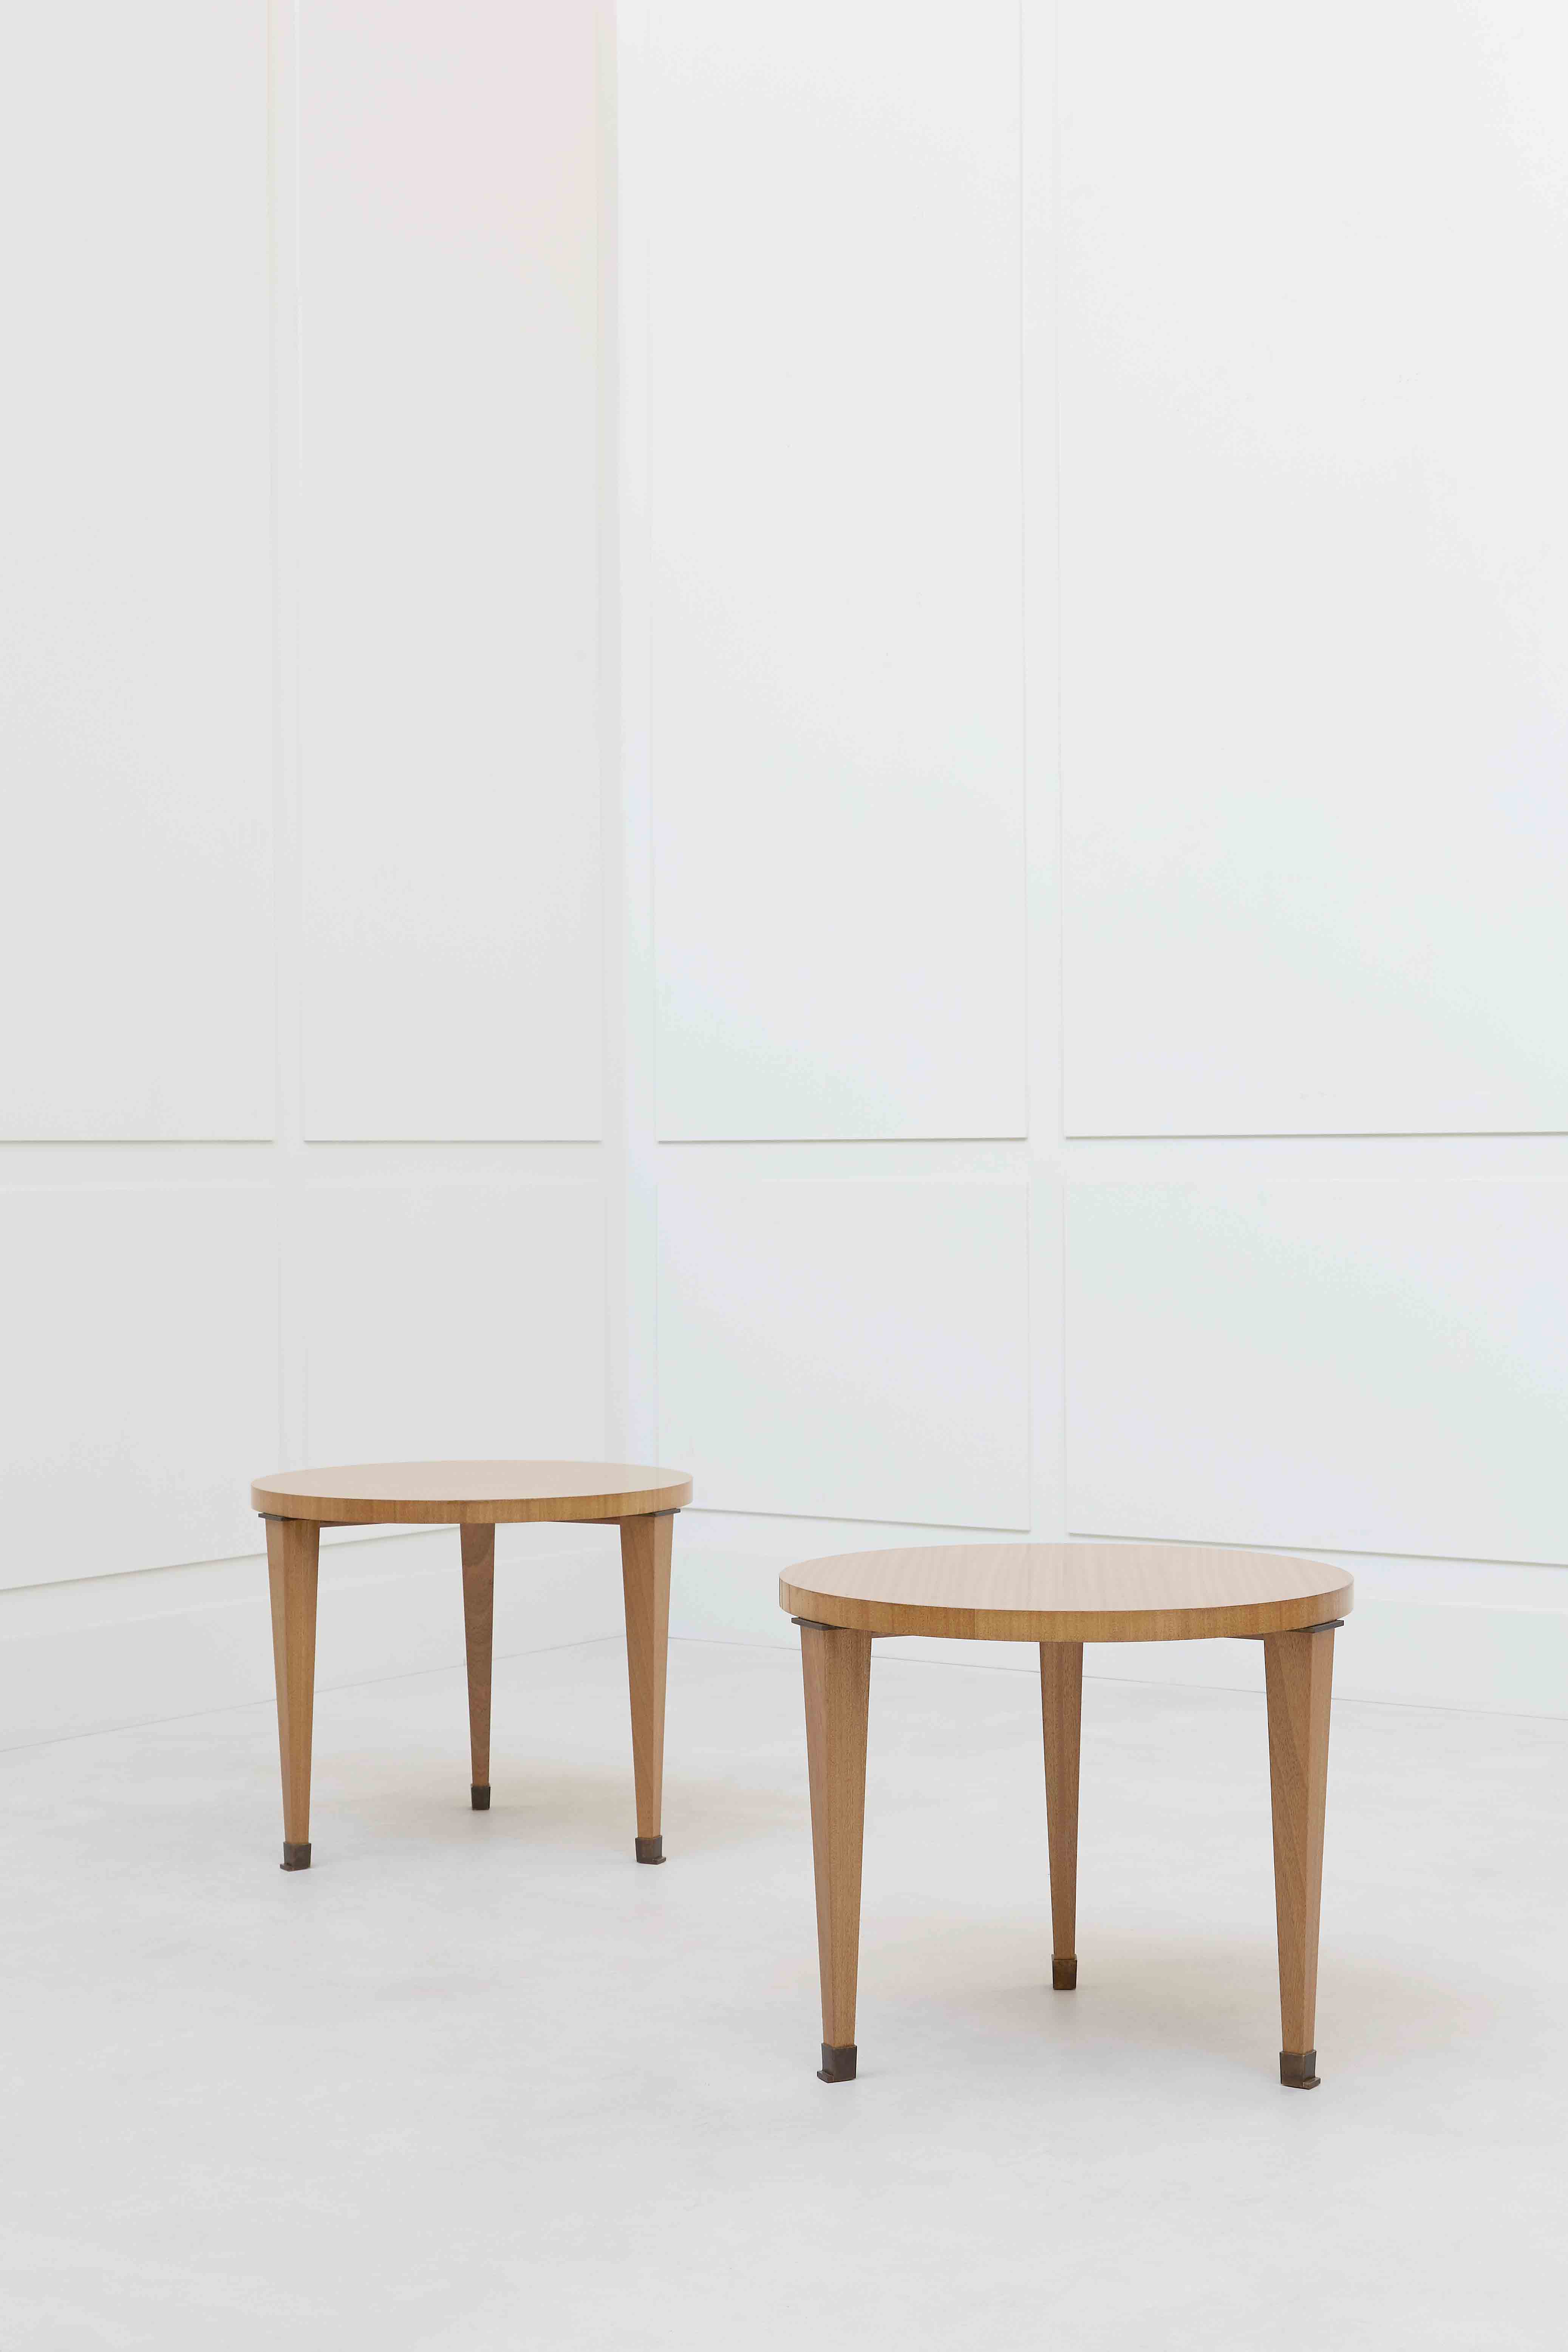 Jacques Quinet, pair of side tables, vue 02